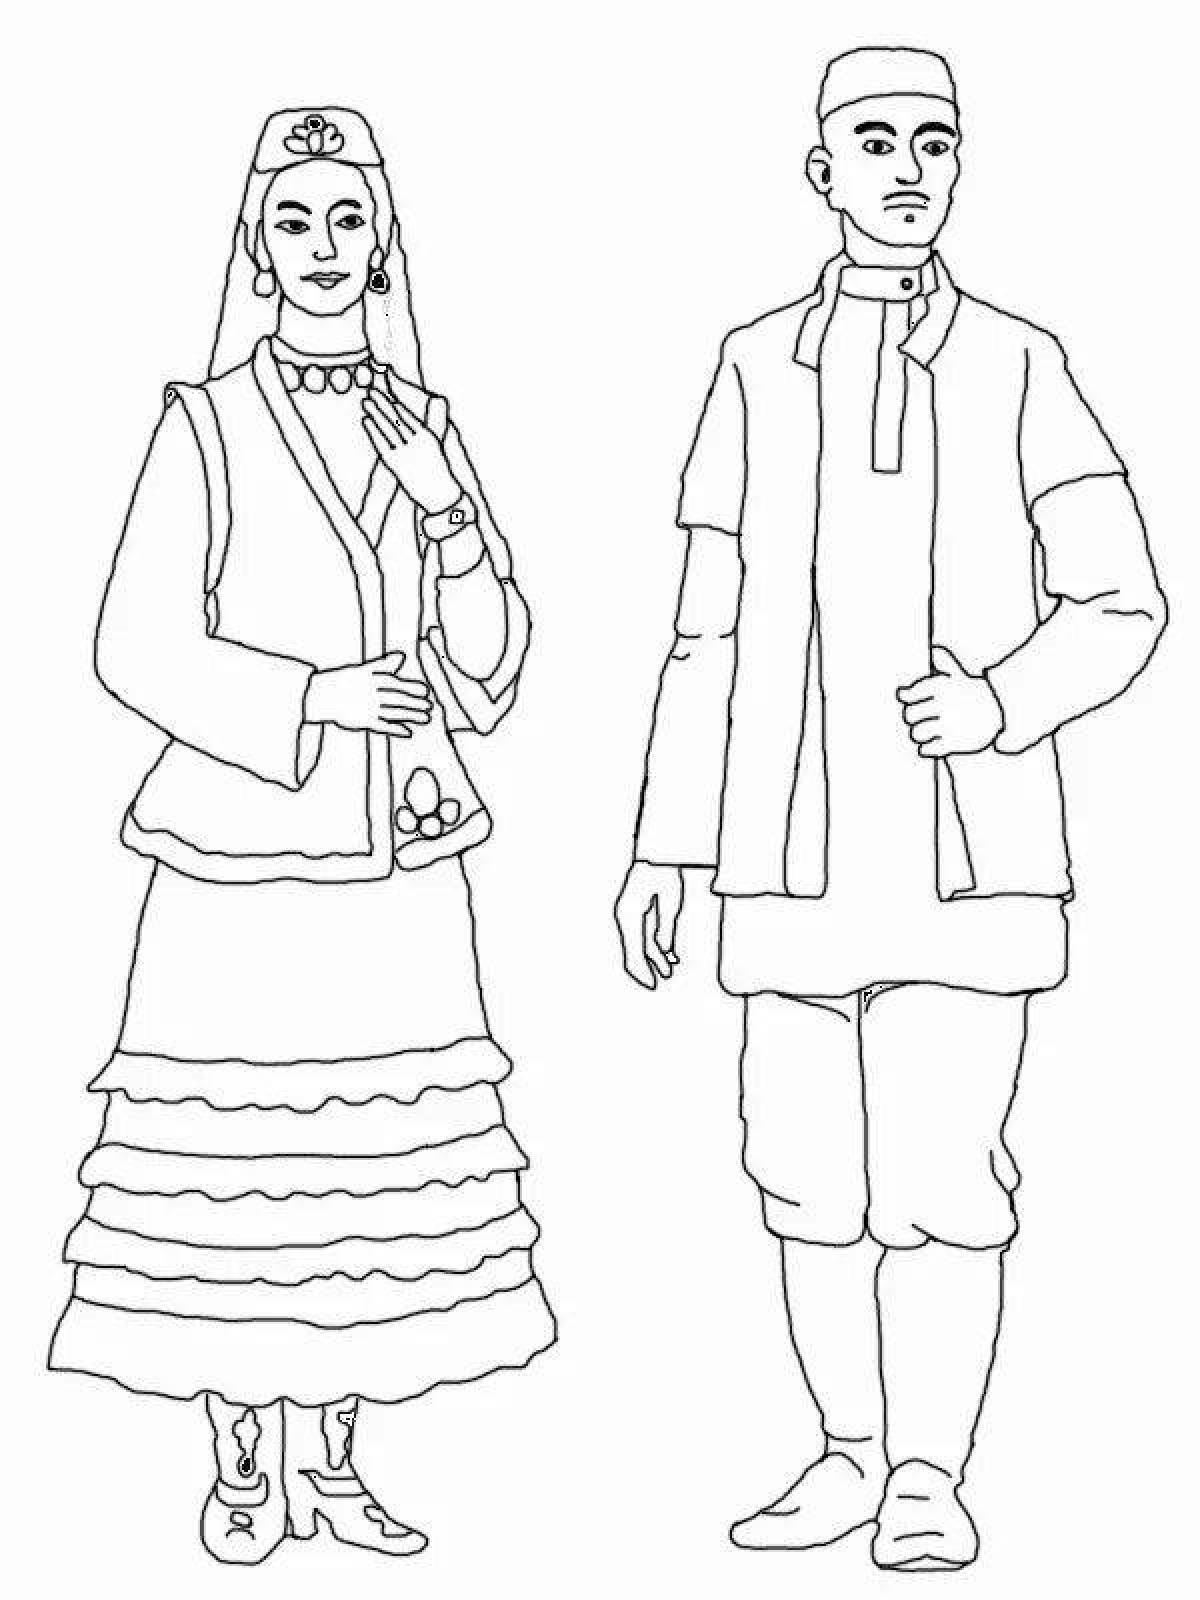 Fancy costume coloring page